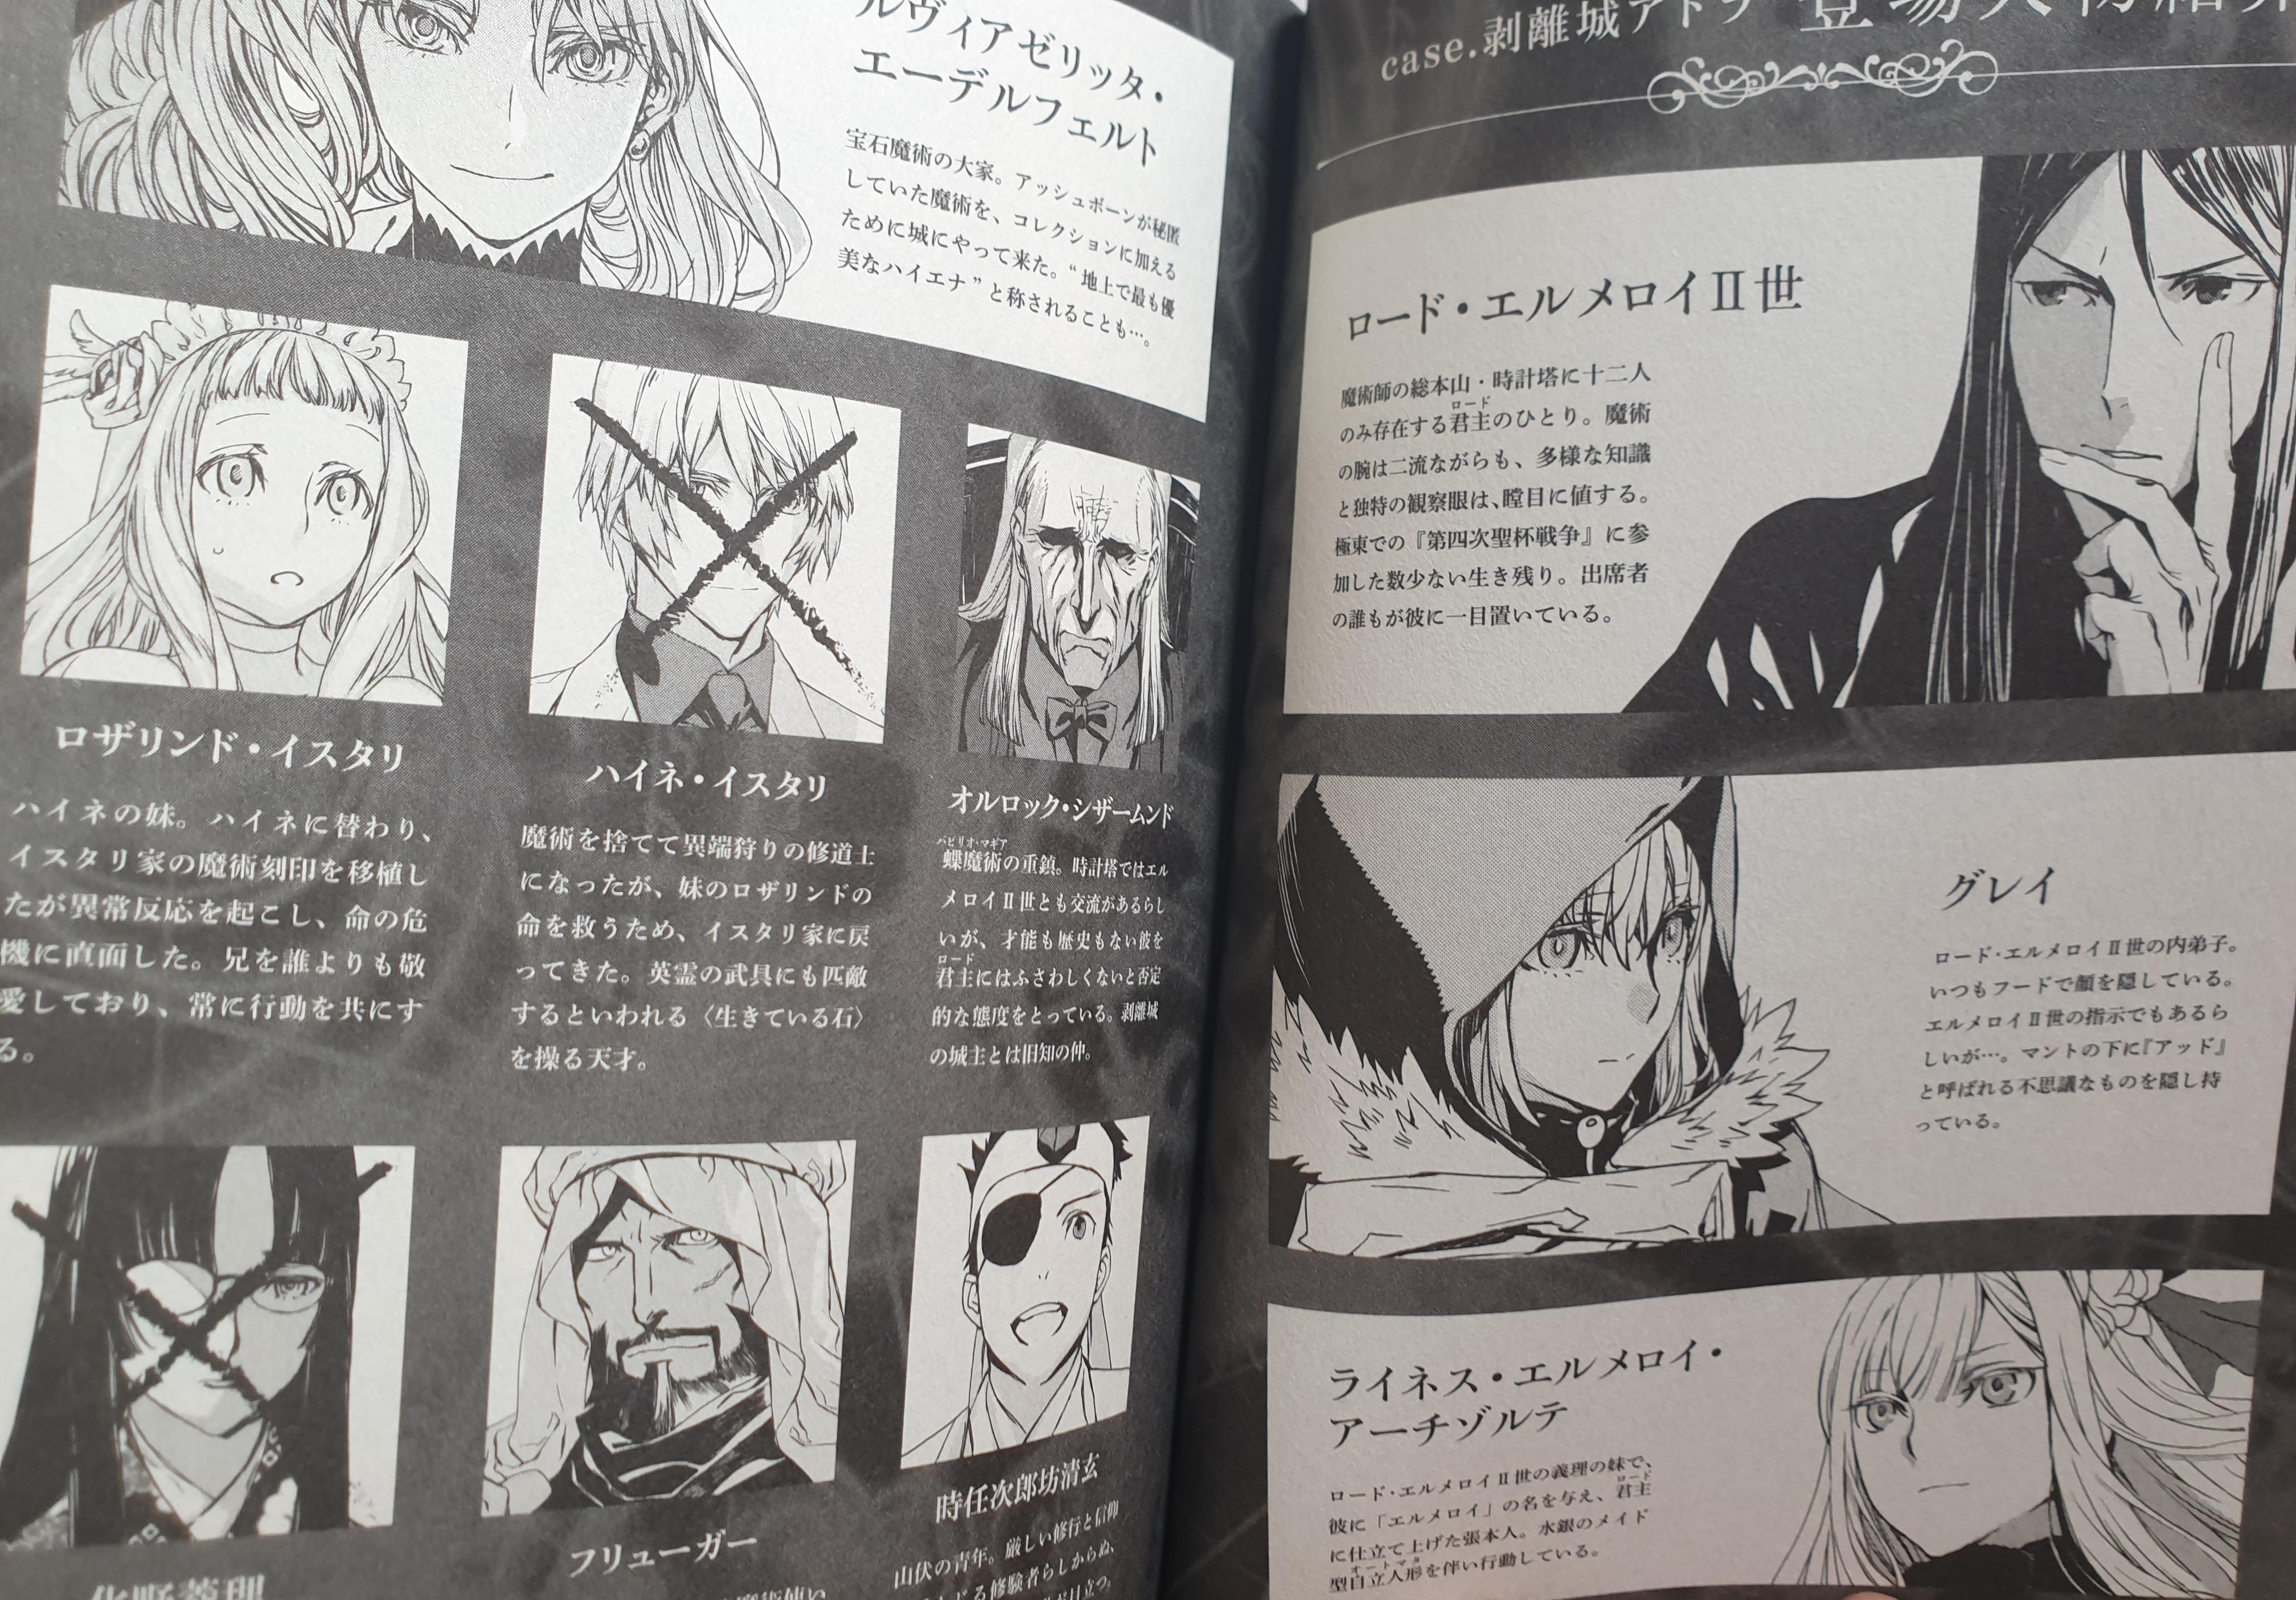 R Grandorder It Is Pretry Nice That Case Files Manga Bother To Cross The Dead Character In The Introduction Page Fgo T Co 7fzlaslnoa T Co Qnusieybiv Twitter